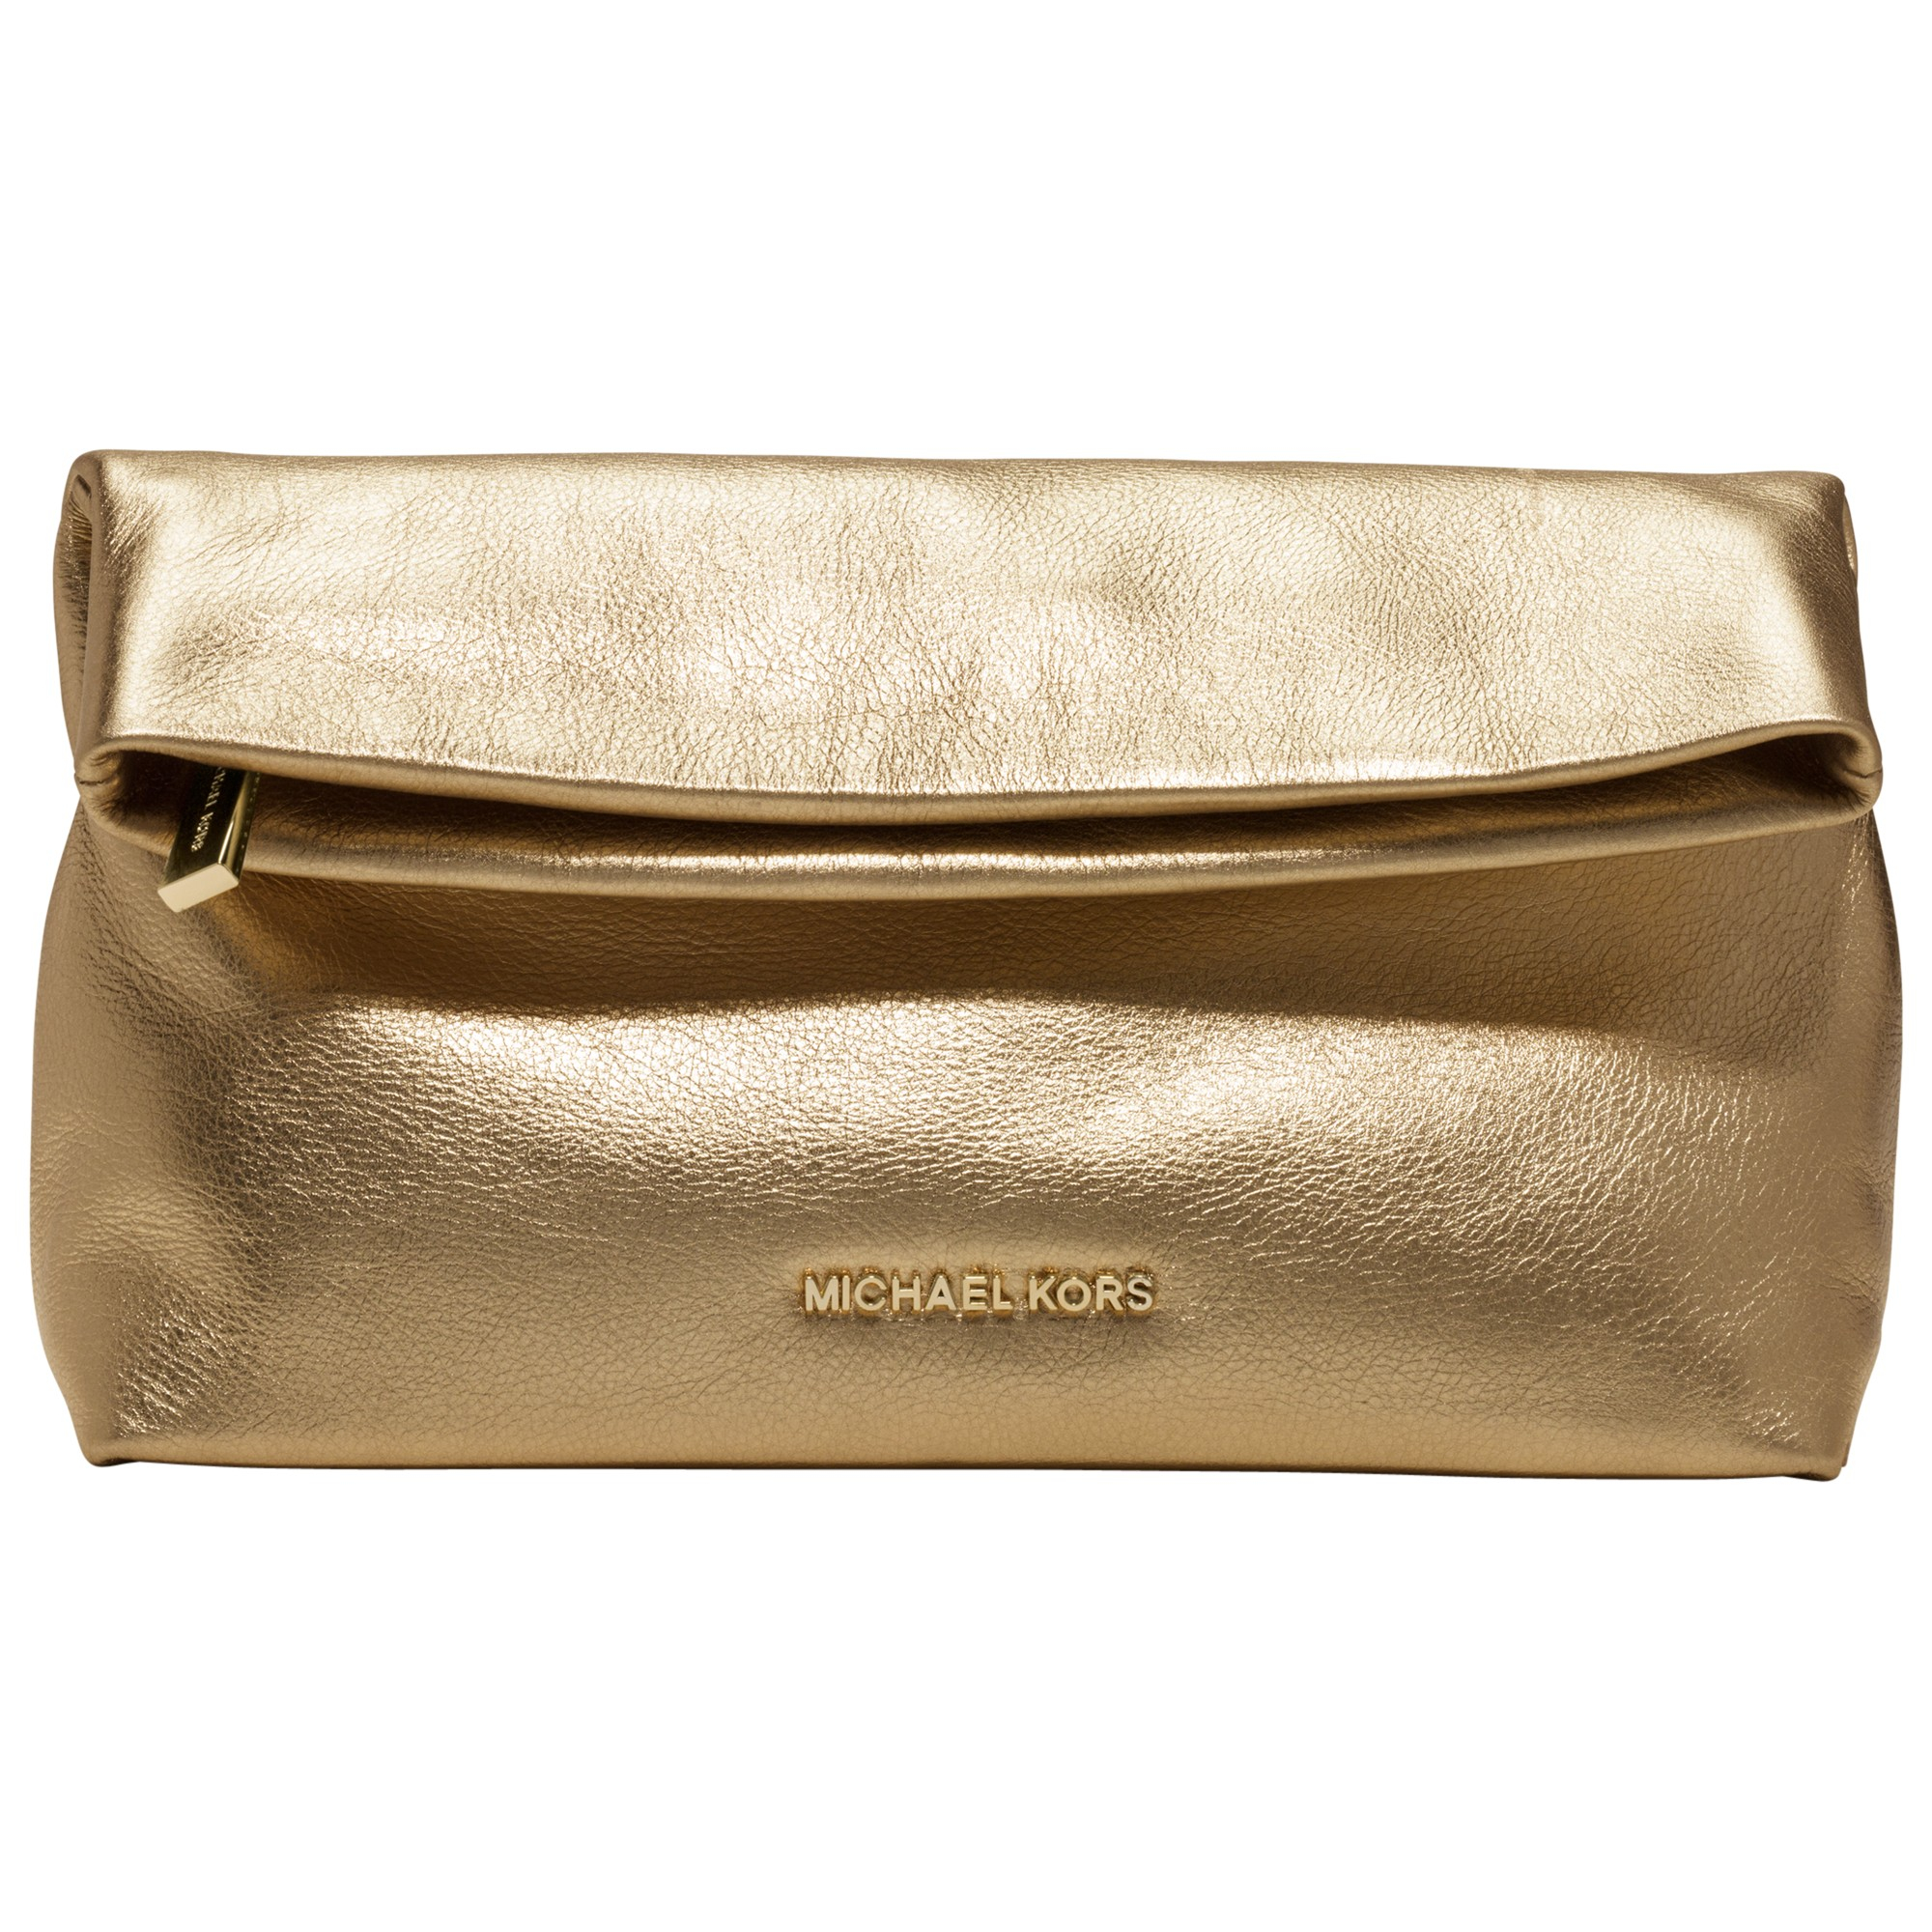 Michael Kors SIGNATURE MK Clutch Purse With Suede And Metal-like Detail |  eBay